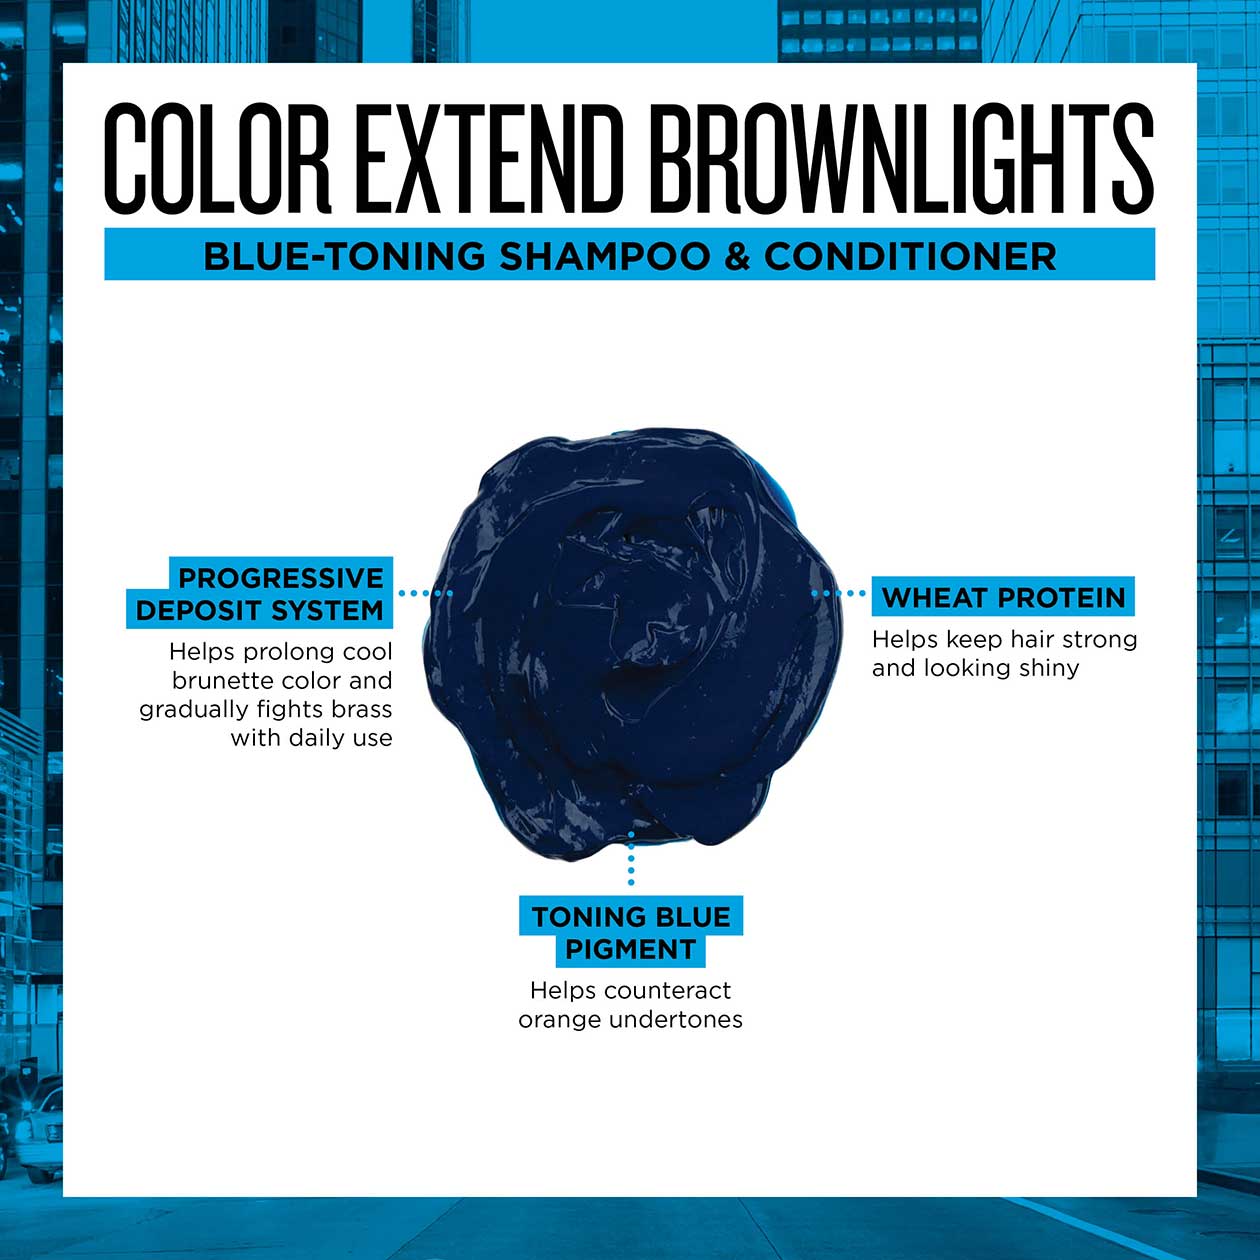 Redken-2019-Color-Extend-Brownlights-Infographic-Hairdressers-Cardiff